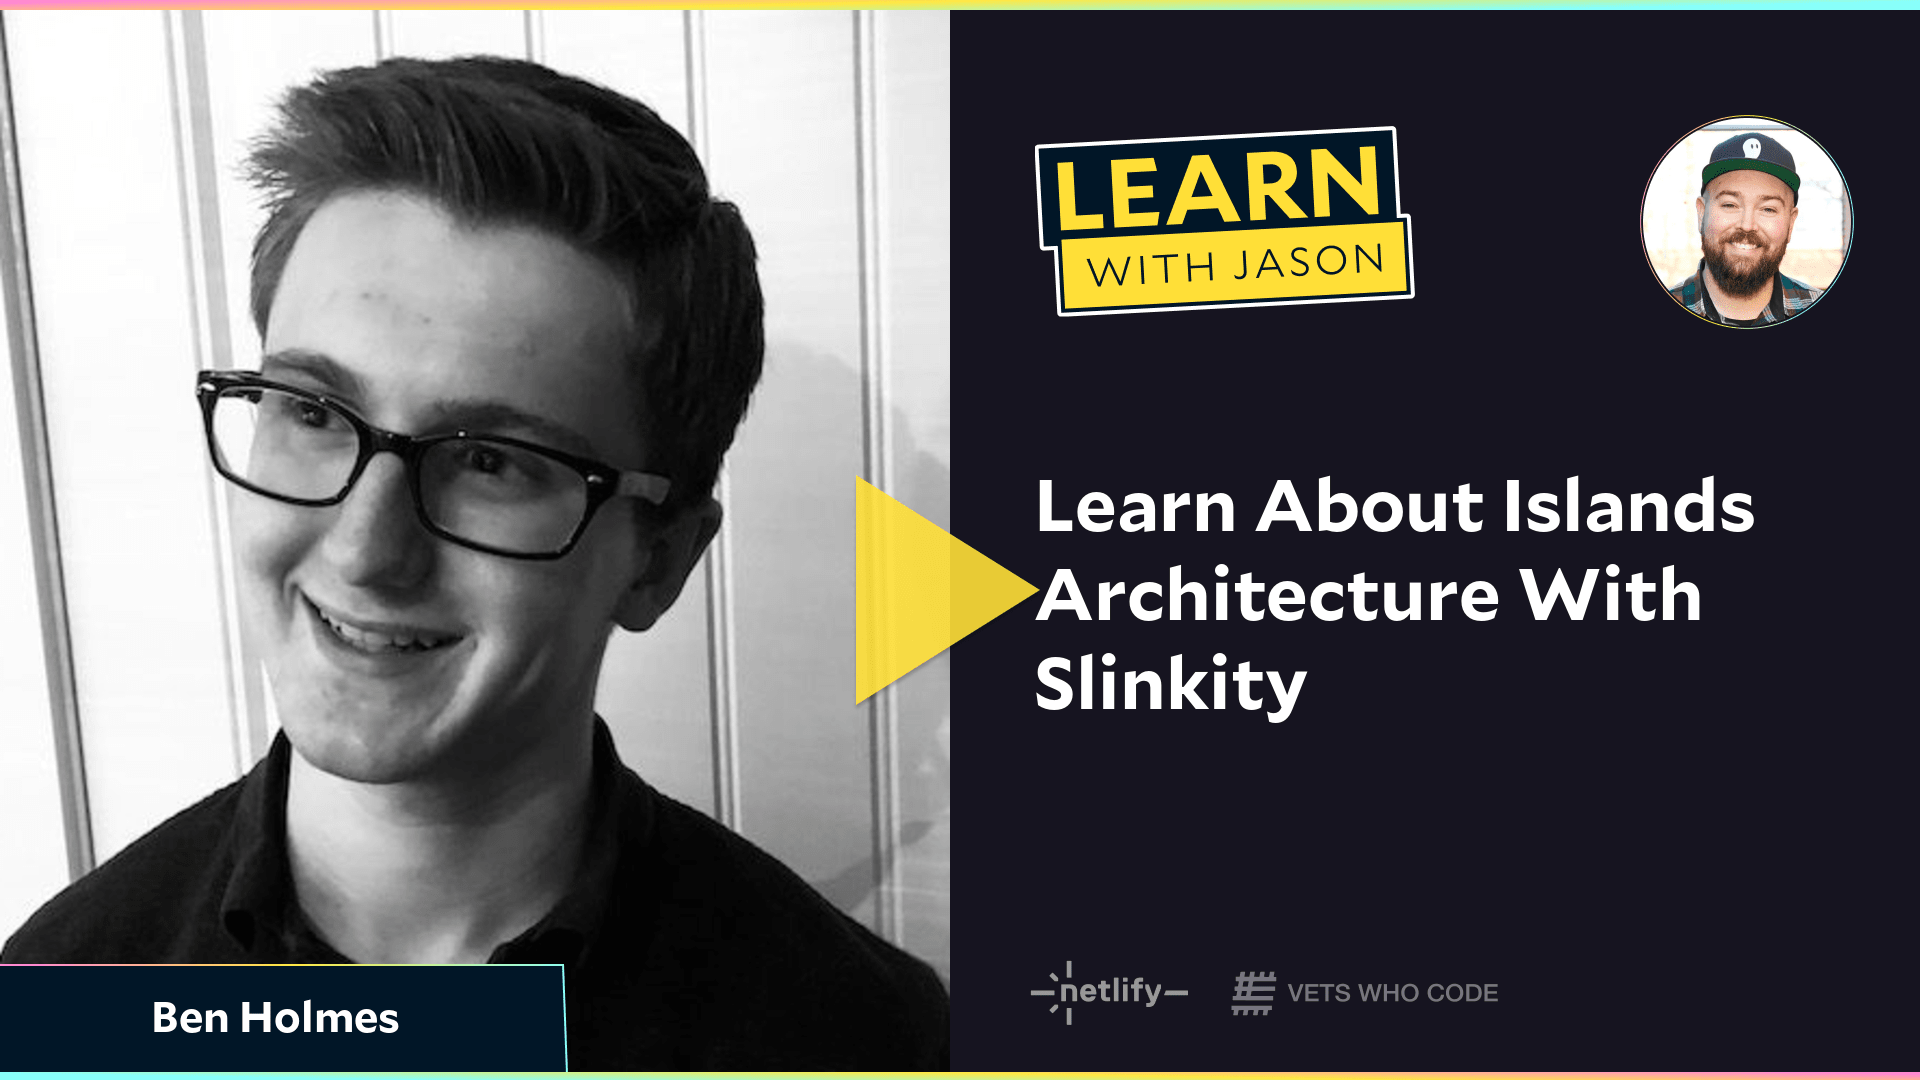 Learn About Islands Architecture With Slinkity (with Ben Holmes)